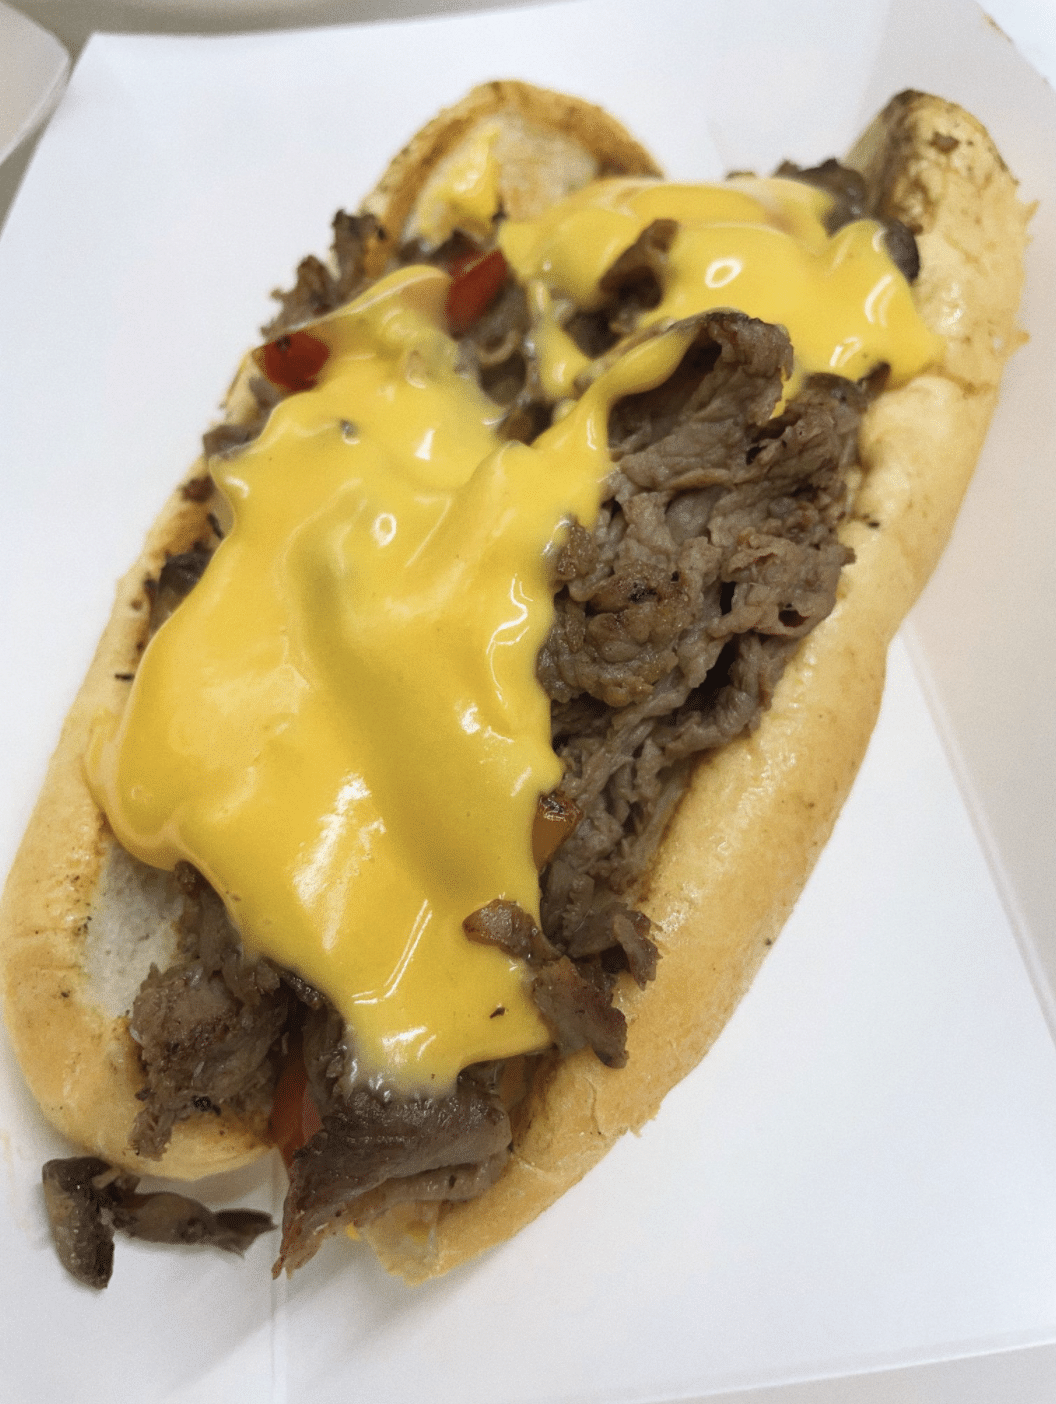 Philly Cheese Steak With Whiz